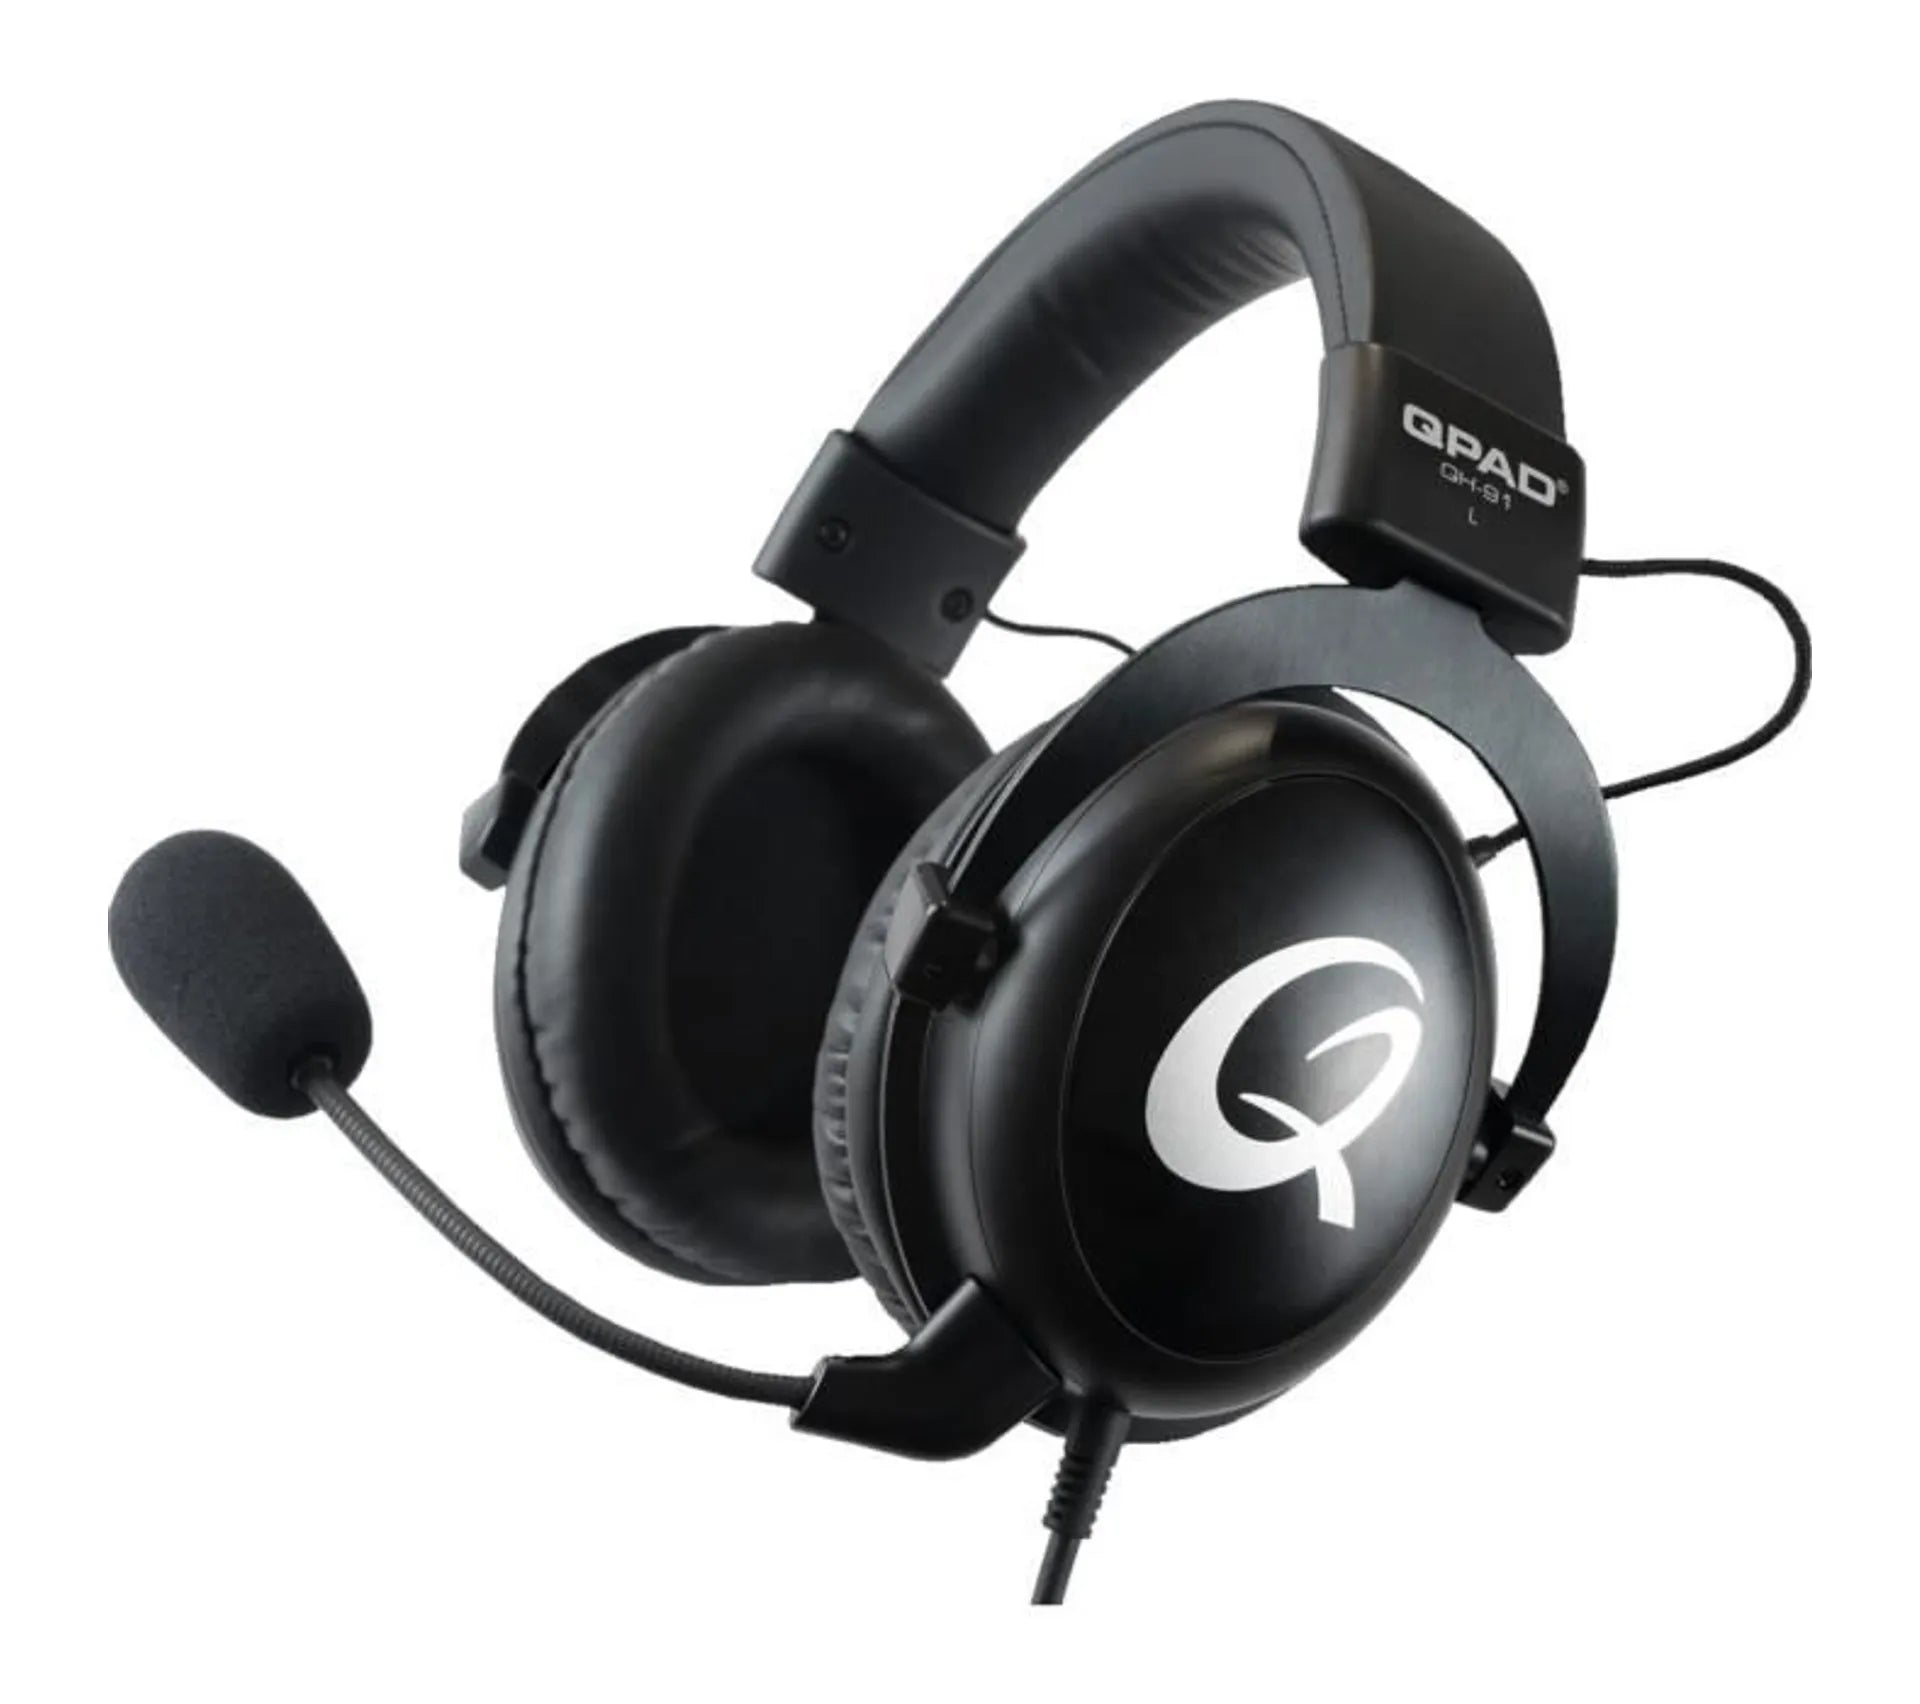 QPAD - QH-91 High End Stereo Gaming Headset, Closed Ear, Noise Cancelling detachable Microphone